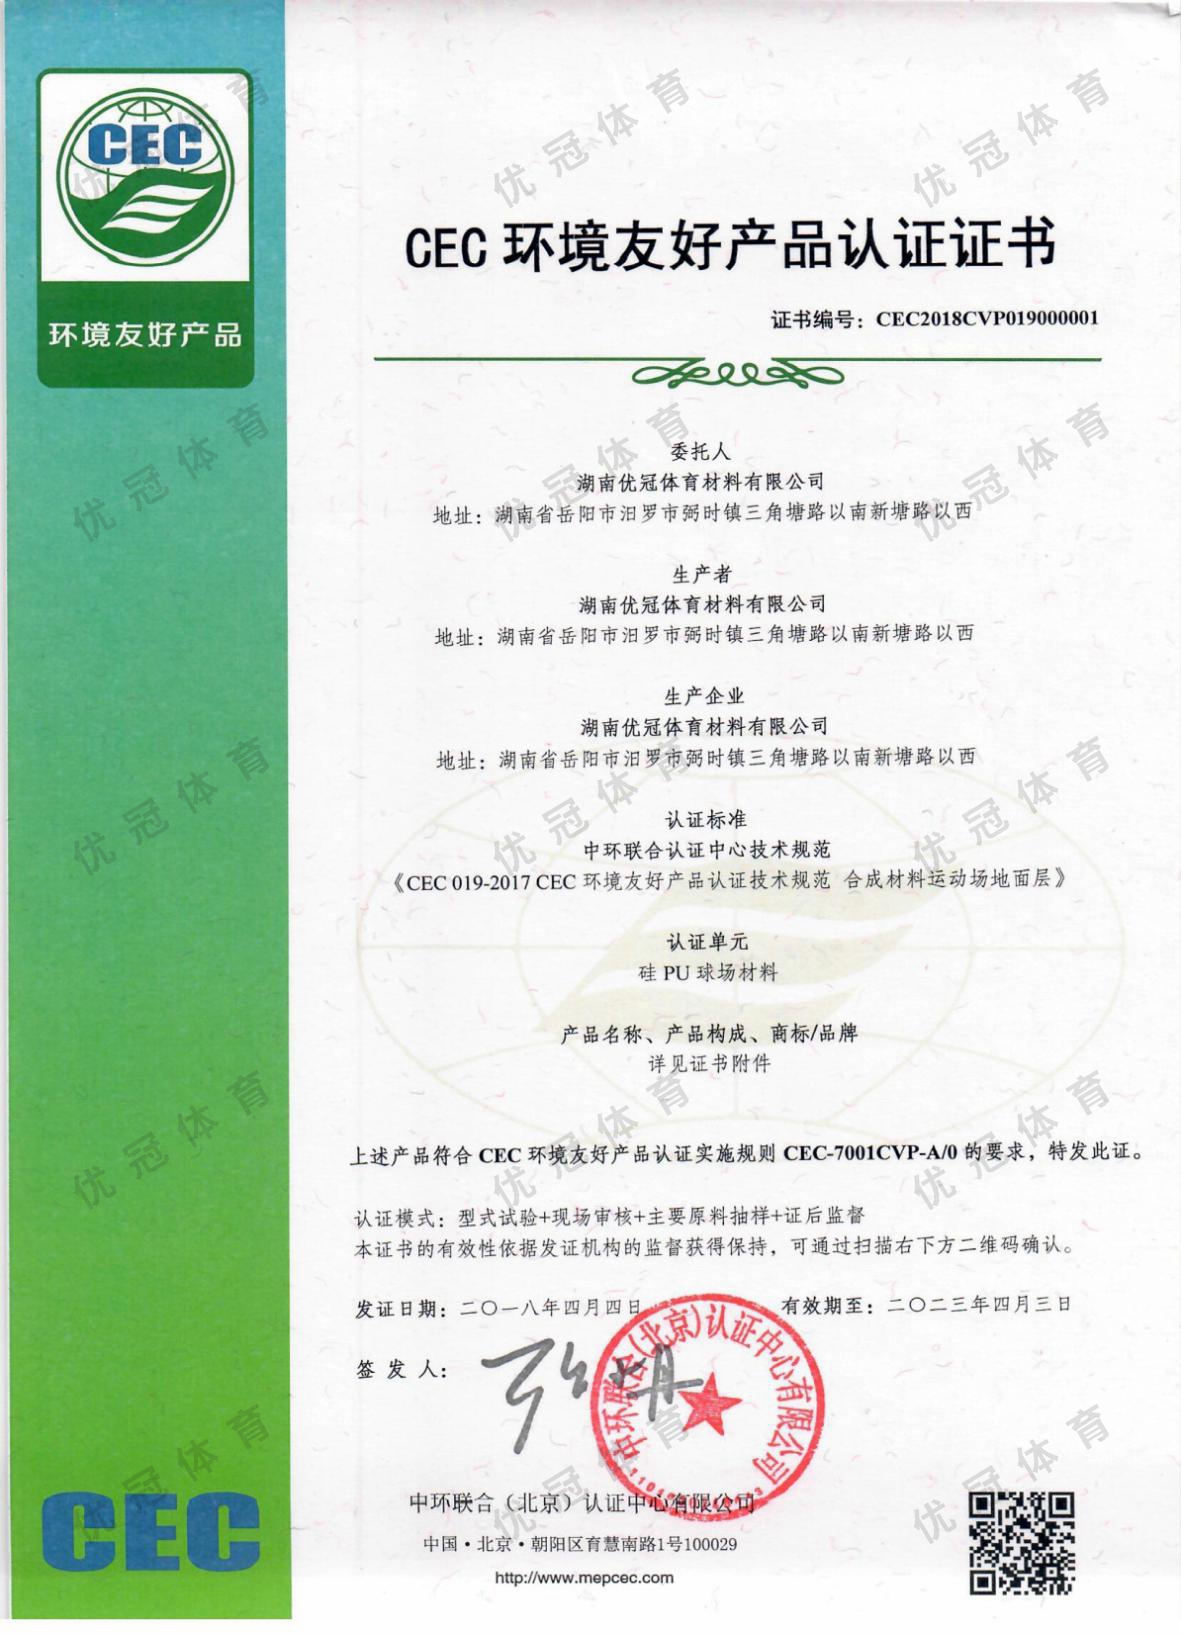 CEC Certification of Environment-friendly Products (Silicon PU Materials for Basketball Courts)